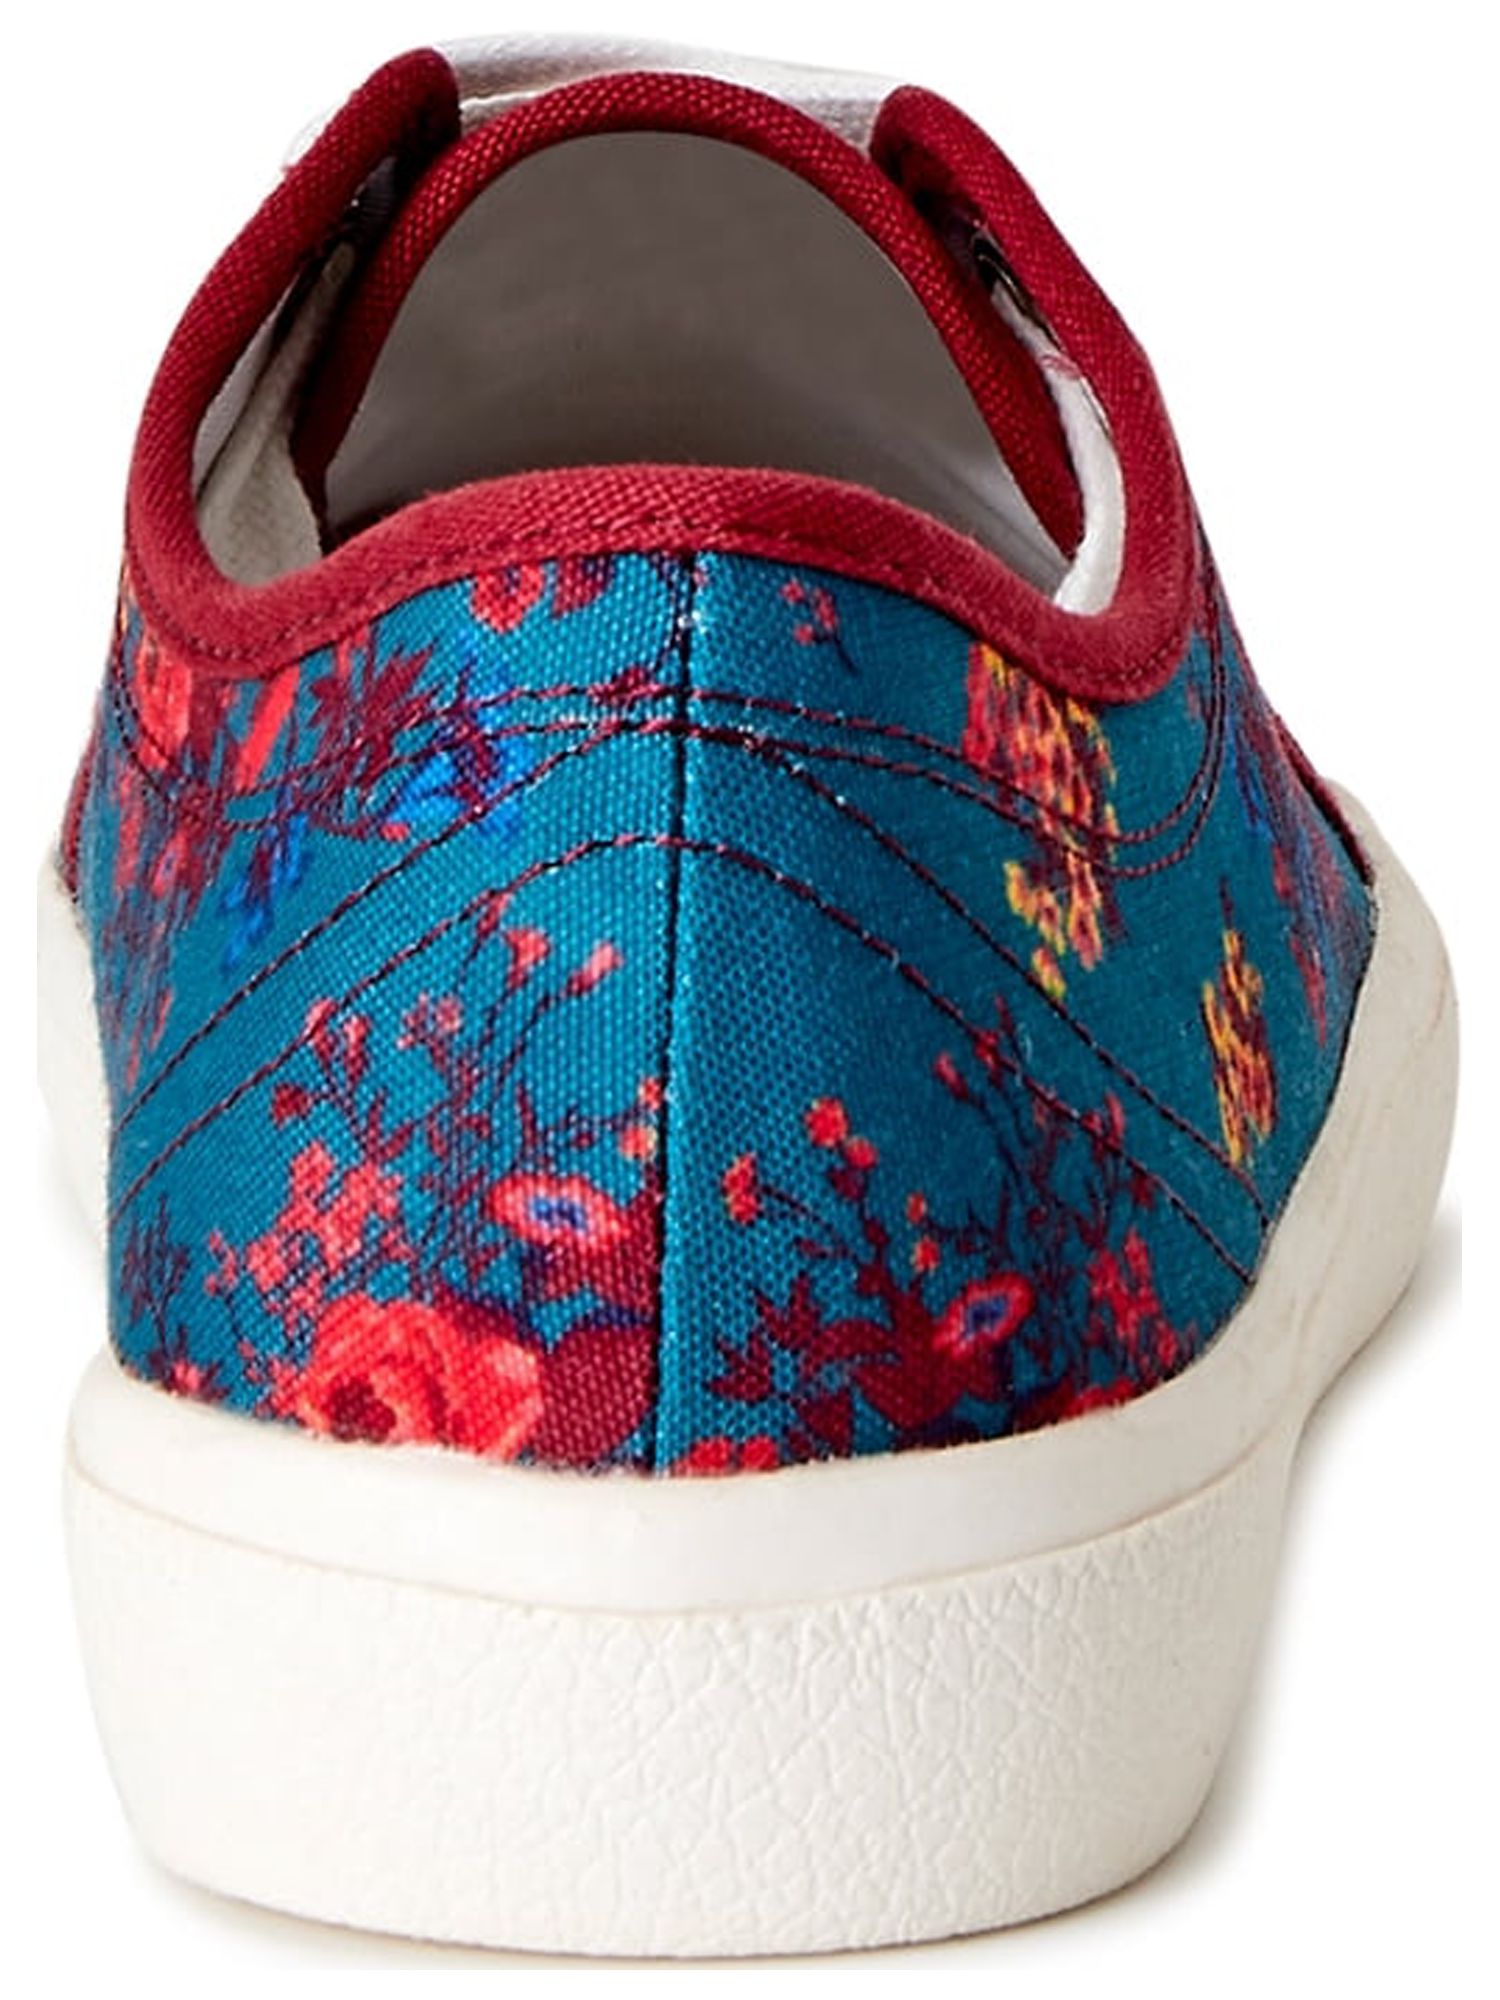 The Pioneer Woman Floral Sneakers, Women's - image 4 of 6